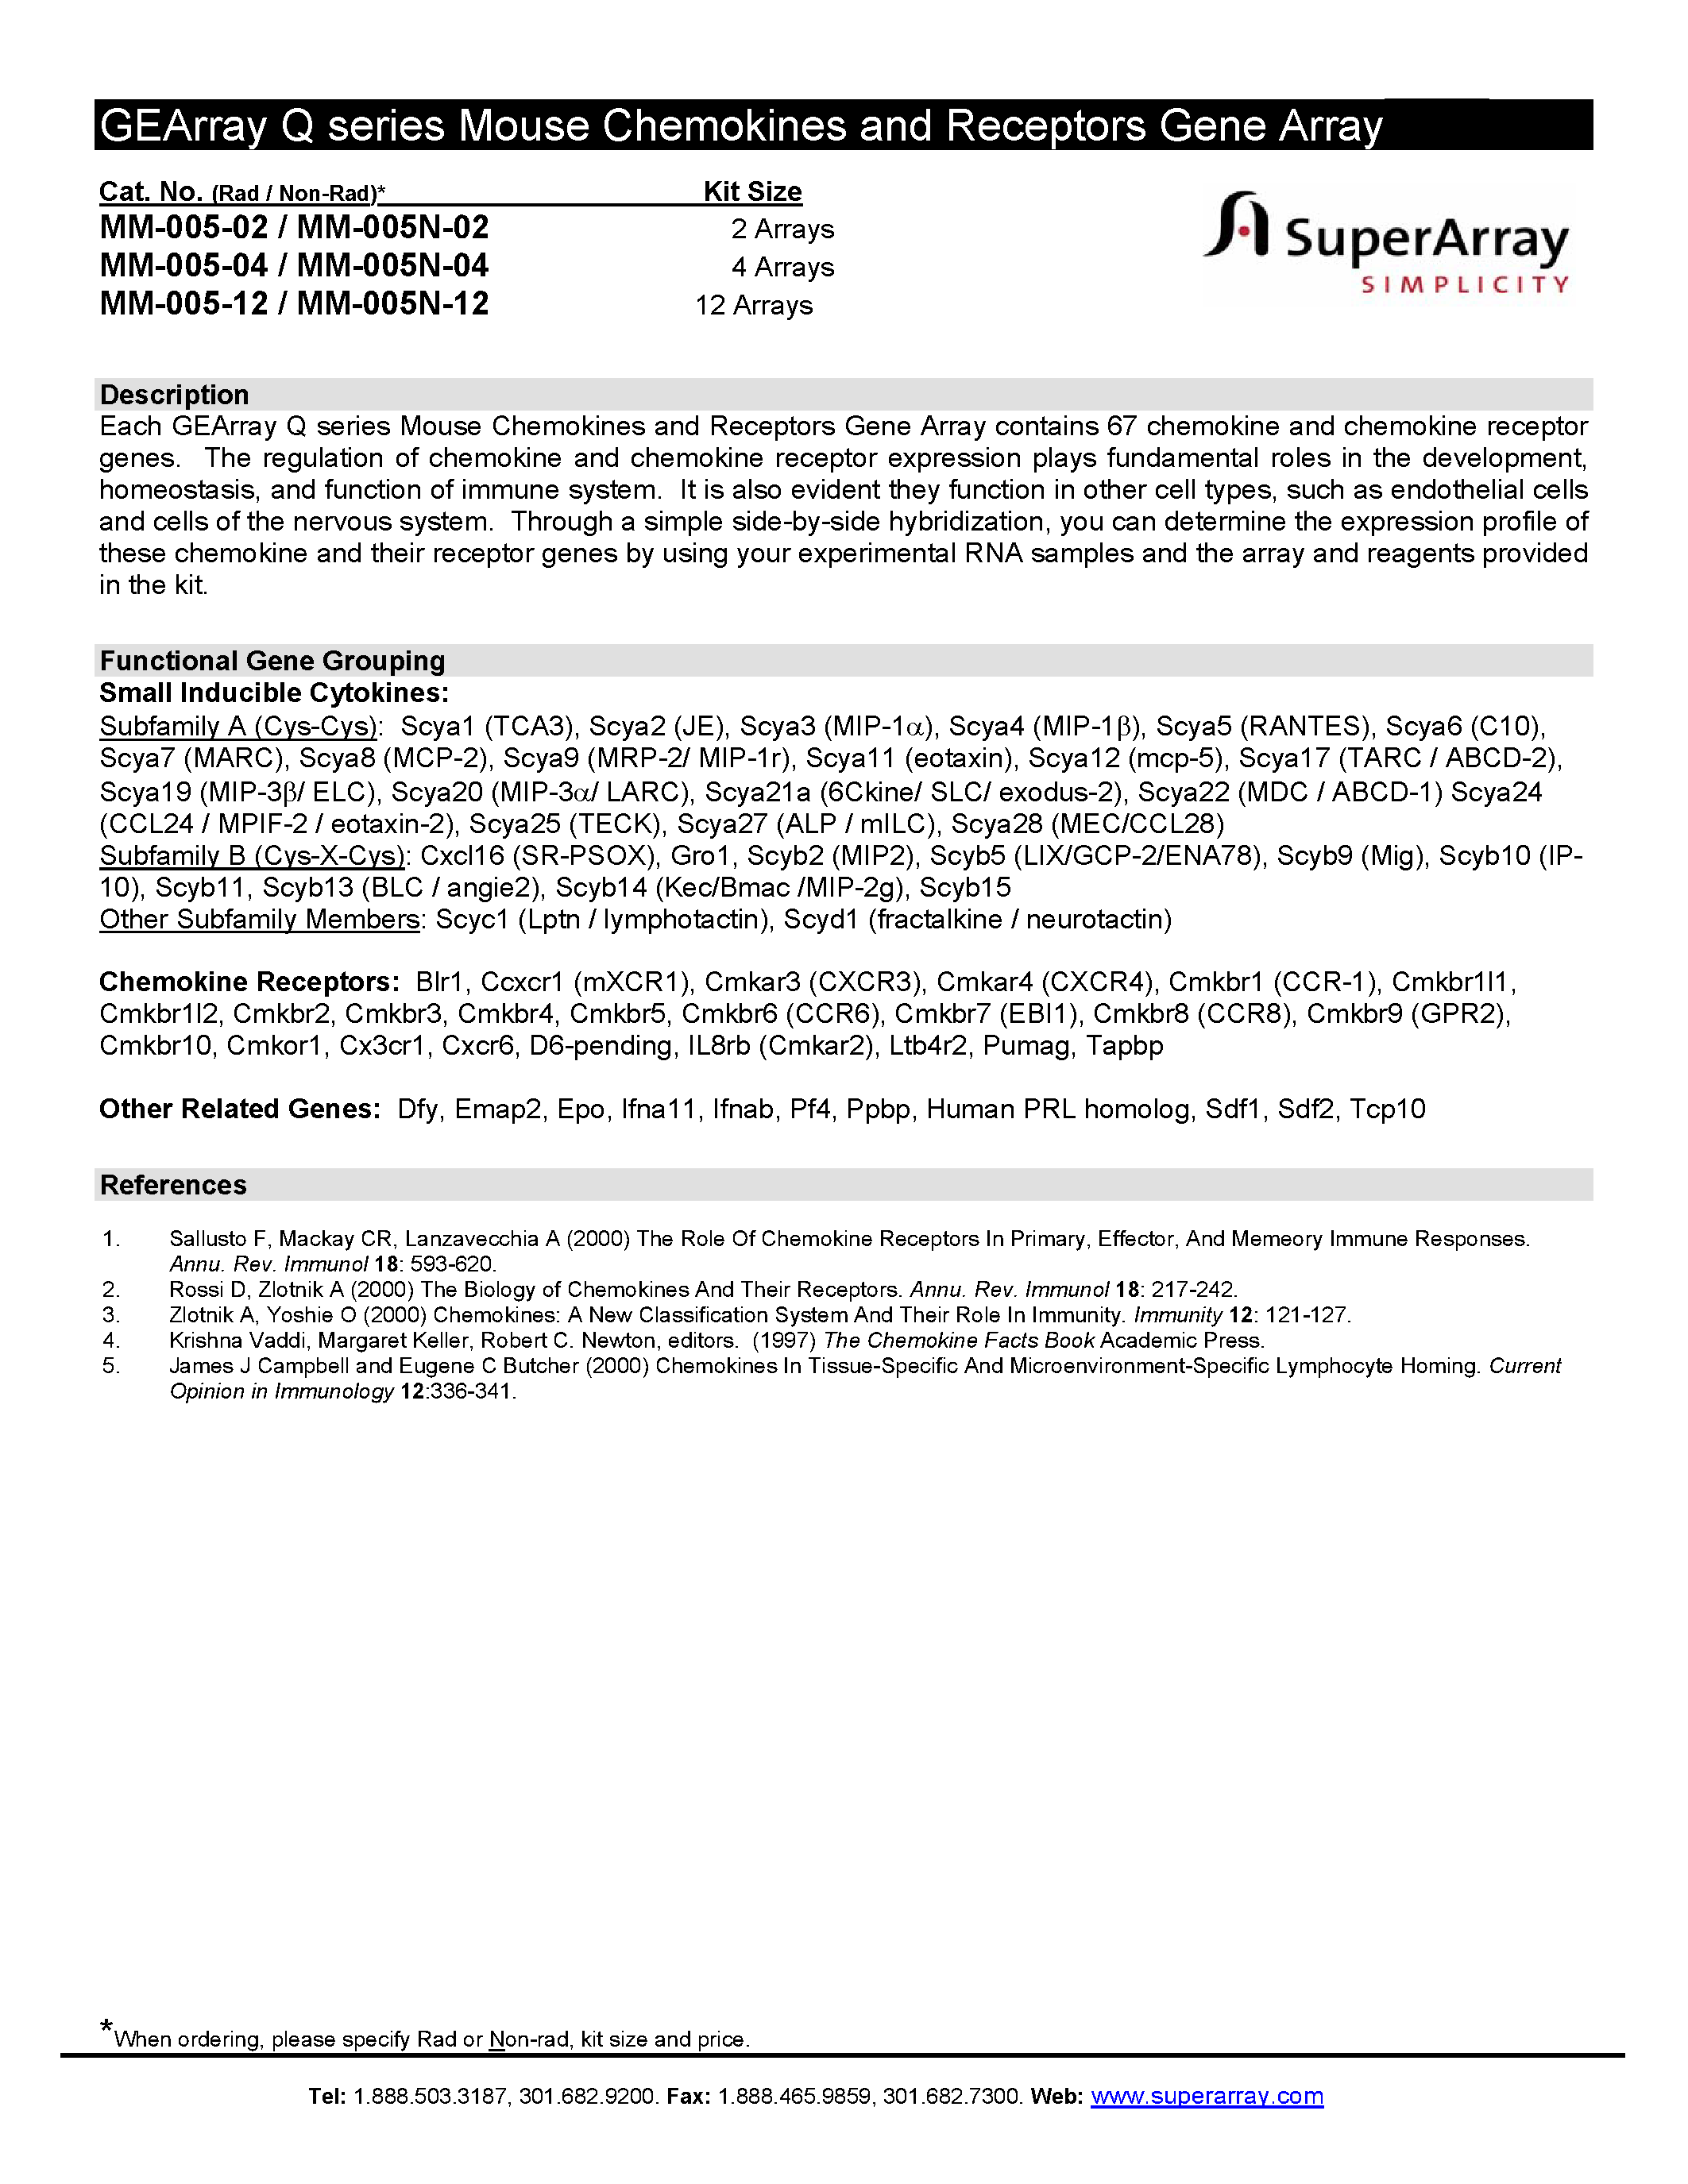 Datasheet MM-005N-04 - GEArray Q series Mouse Chemokines and Receptors Gene Array page 1